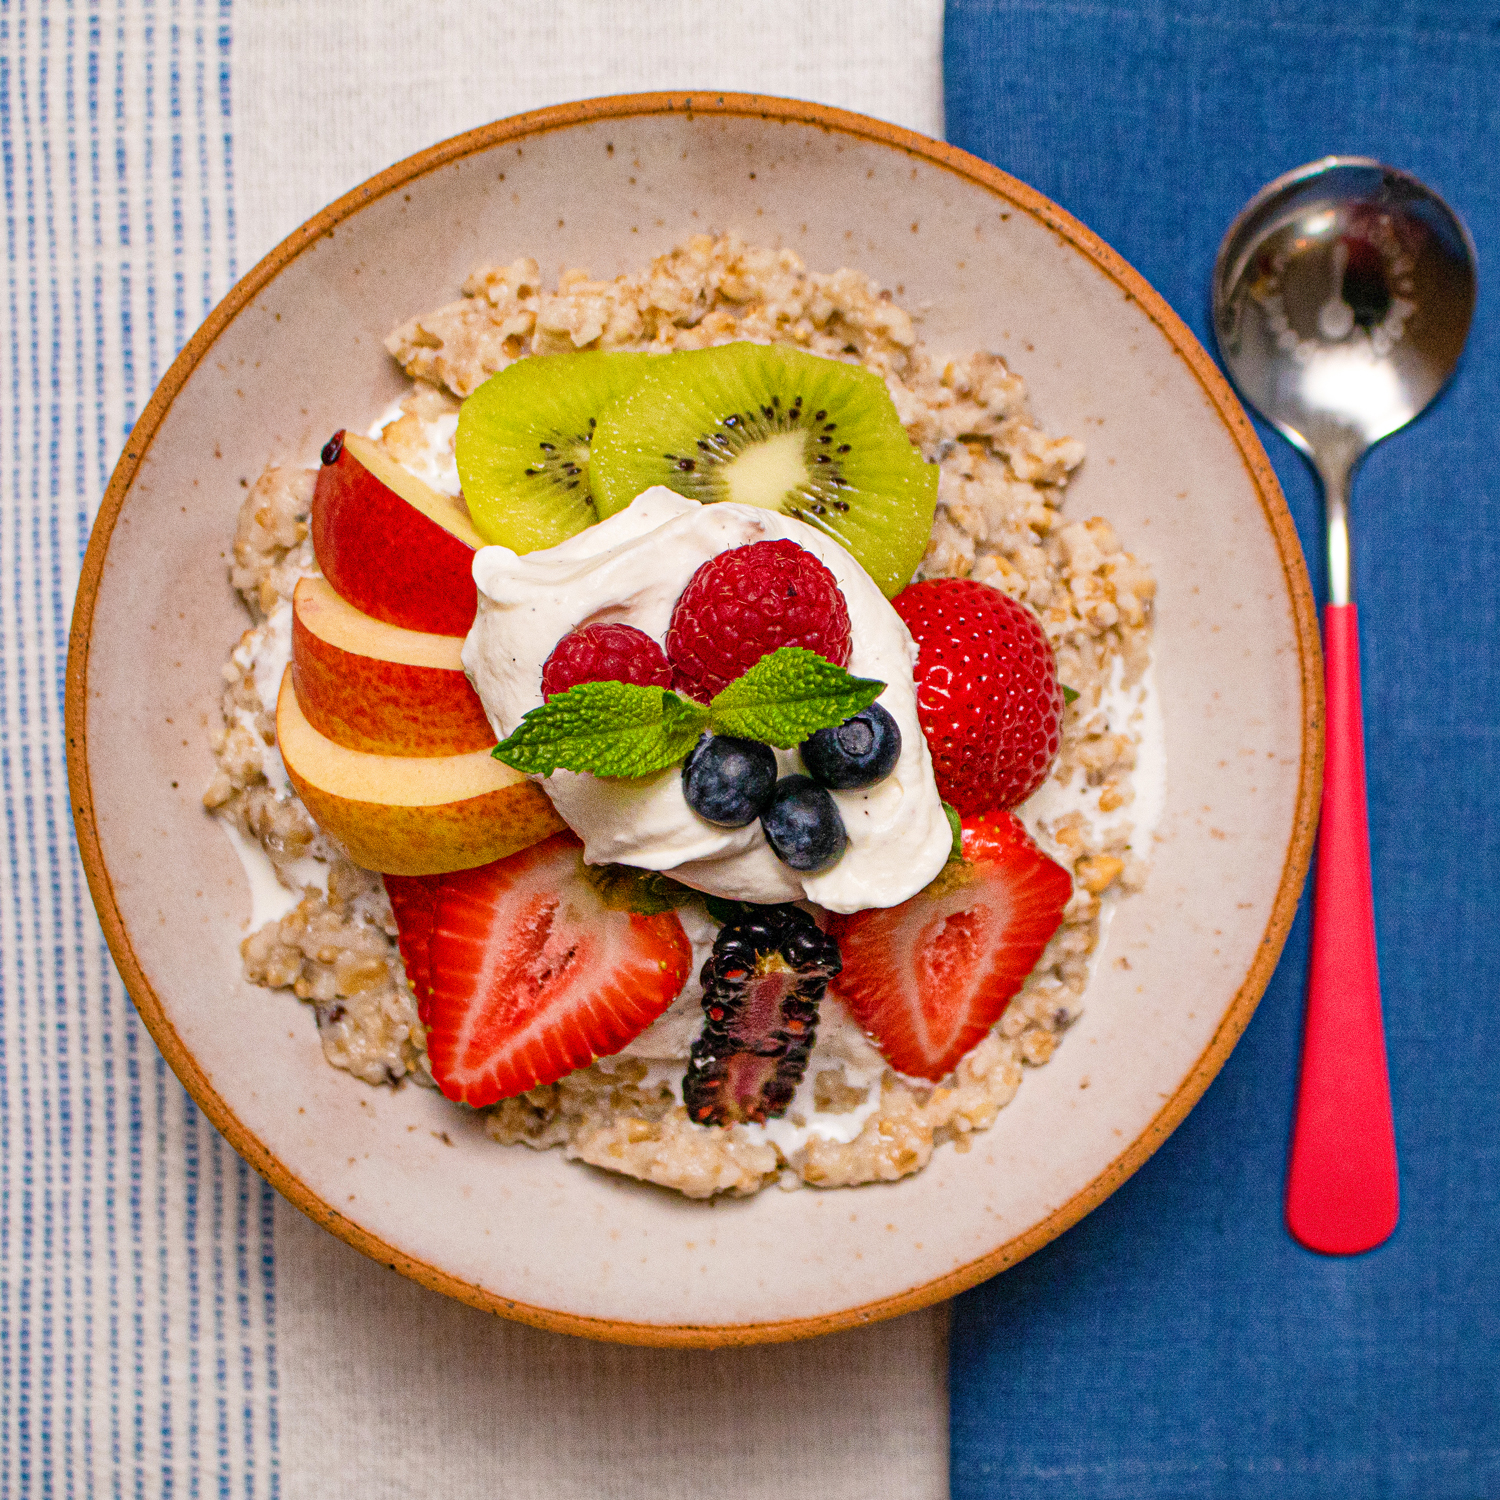 Proper Good's Perfectly Plain Oatmeal under a blanket of fruits and cream